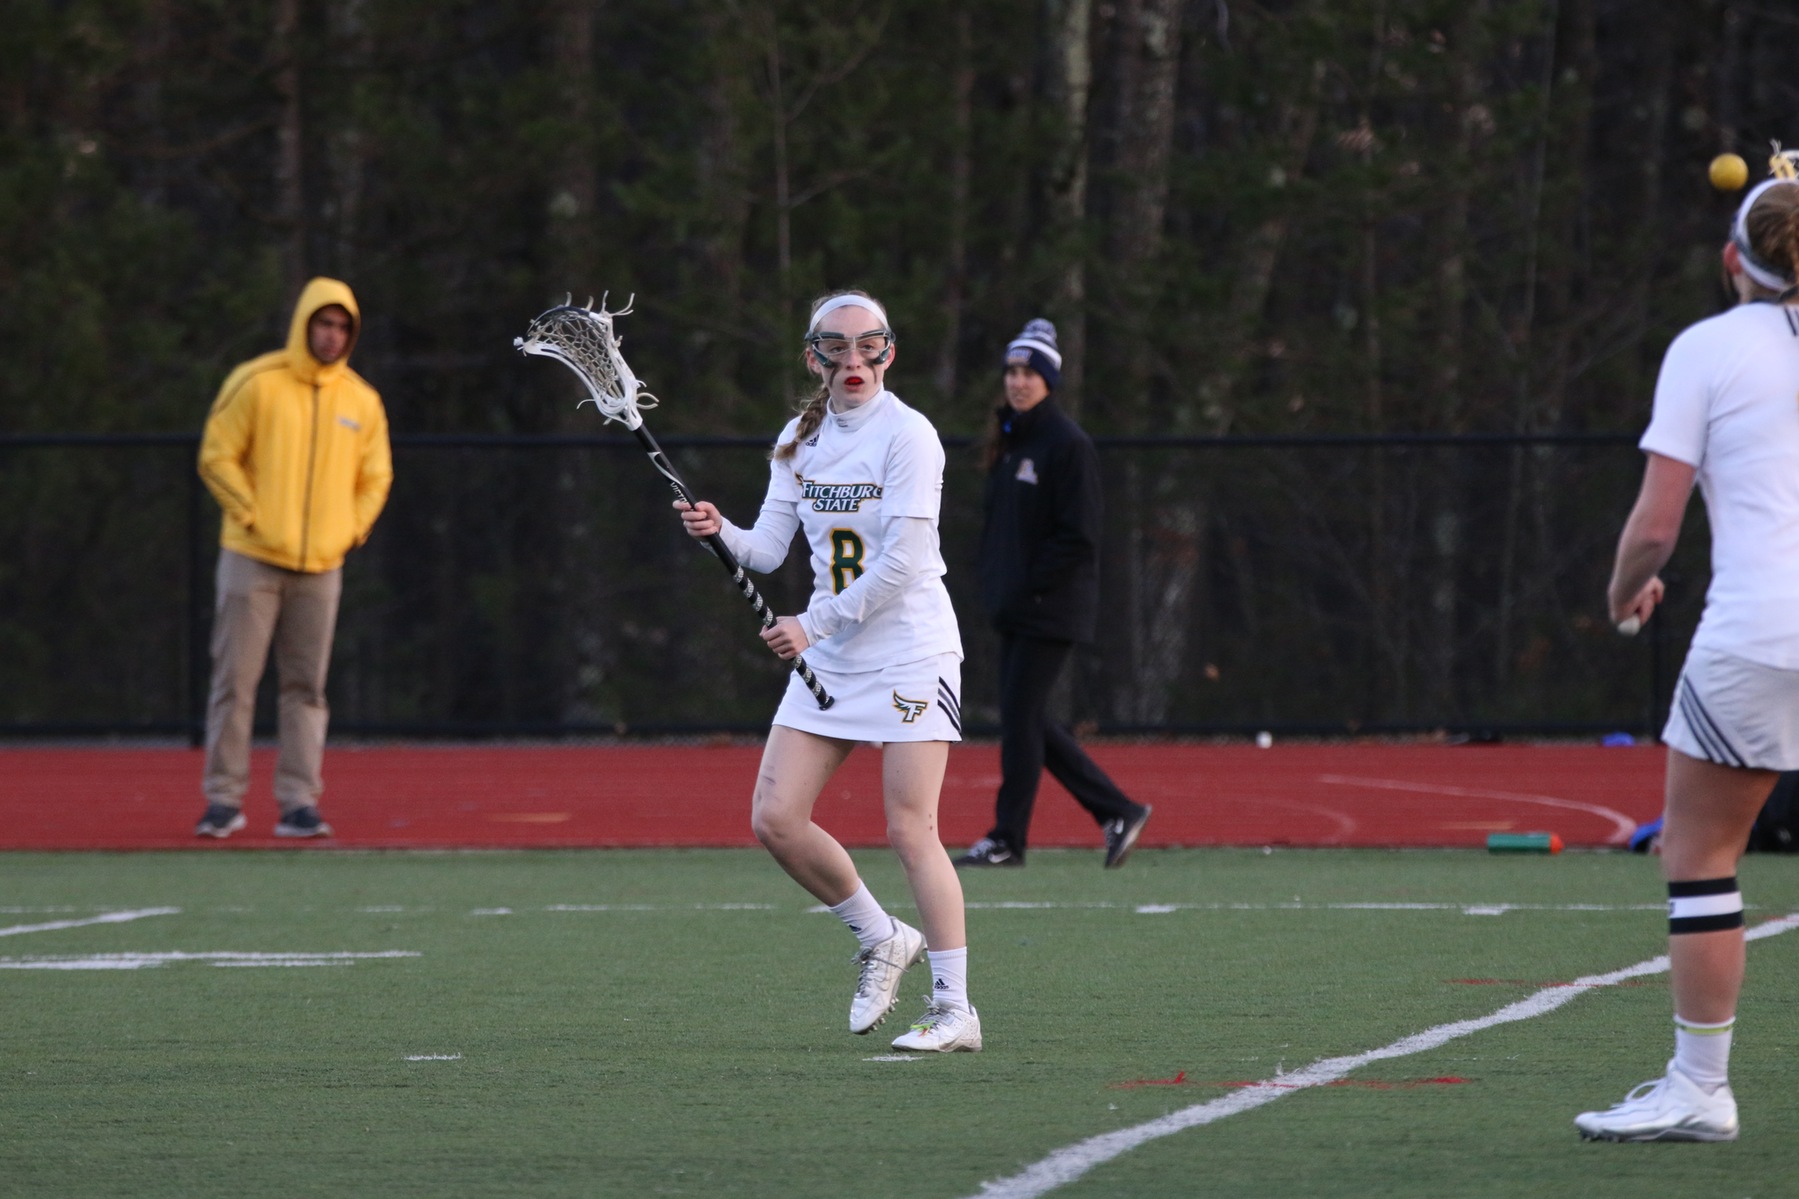 Laferriere Leads Falcons to MASCAC Win over Salem State